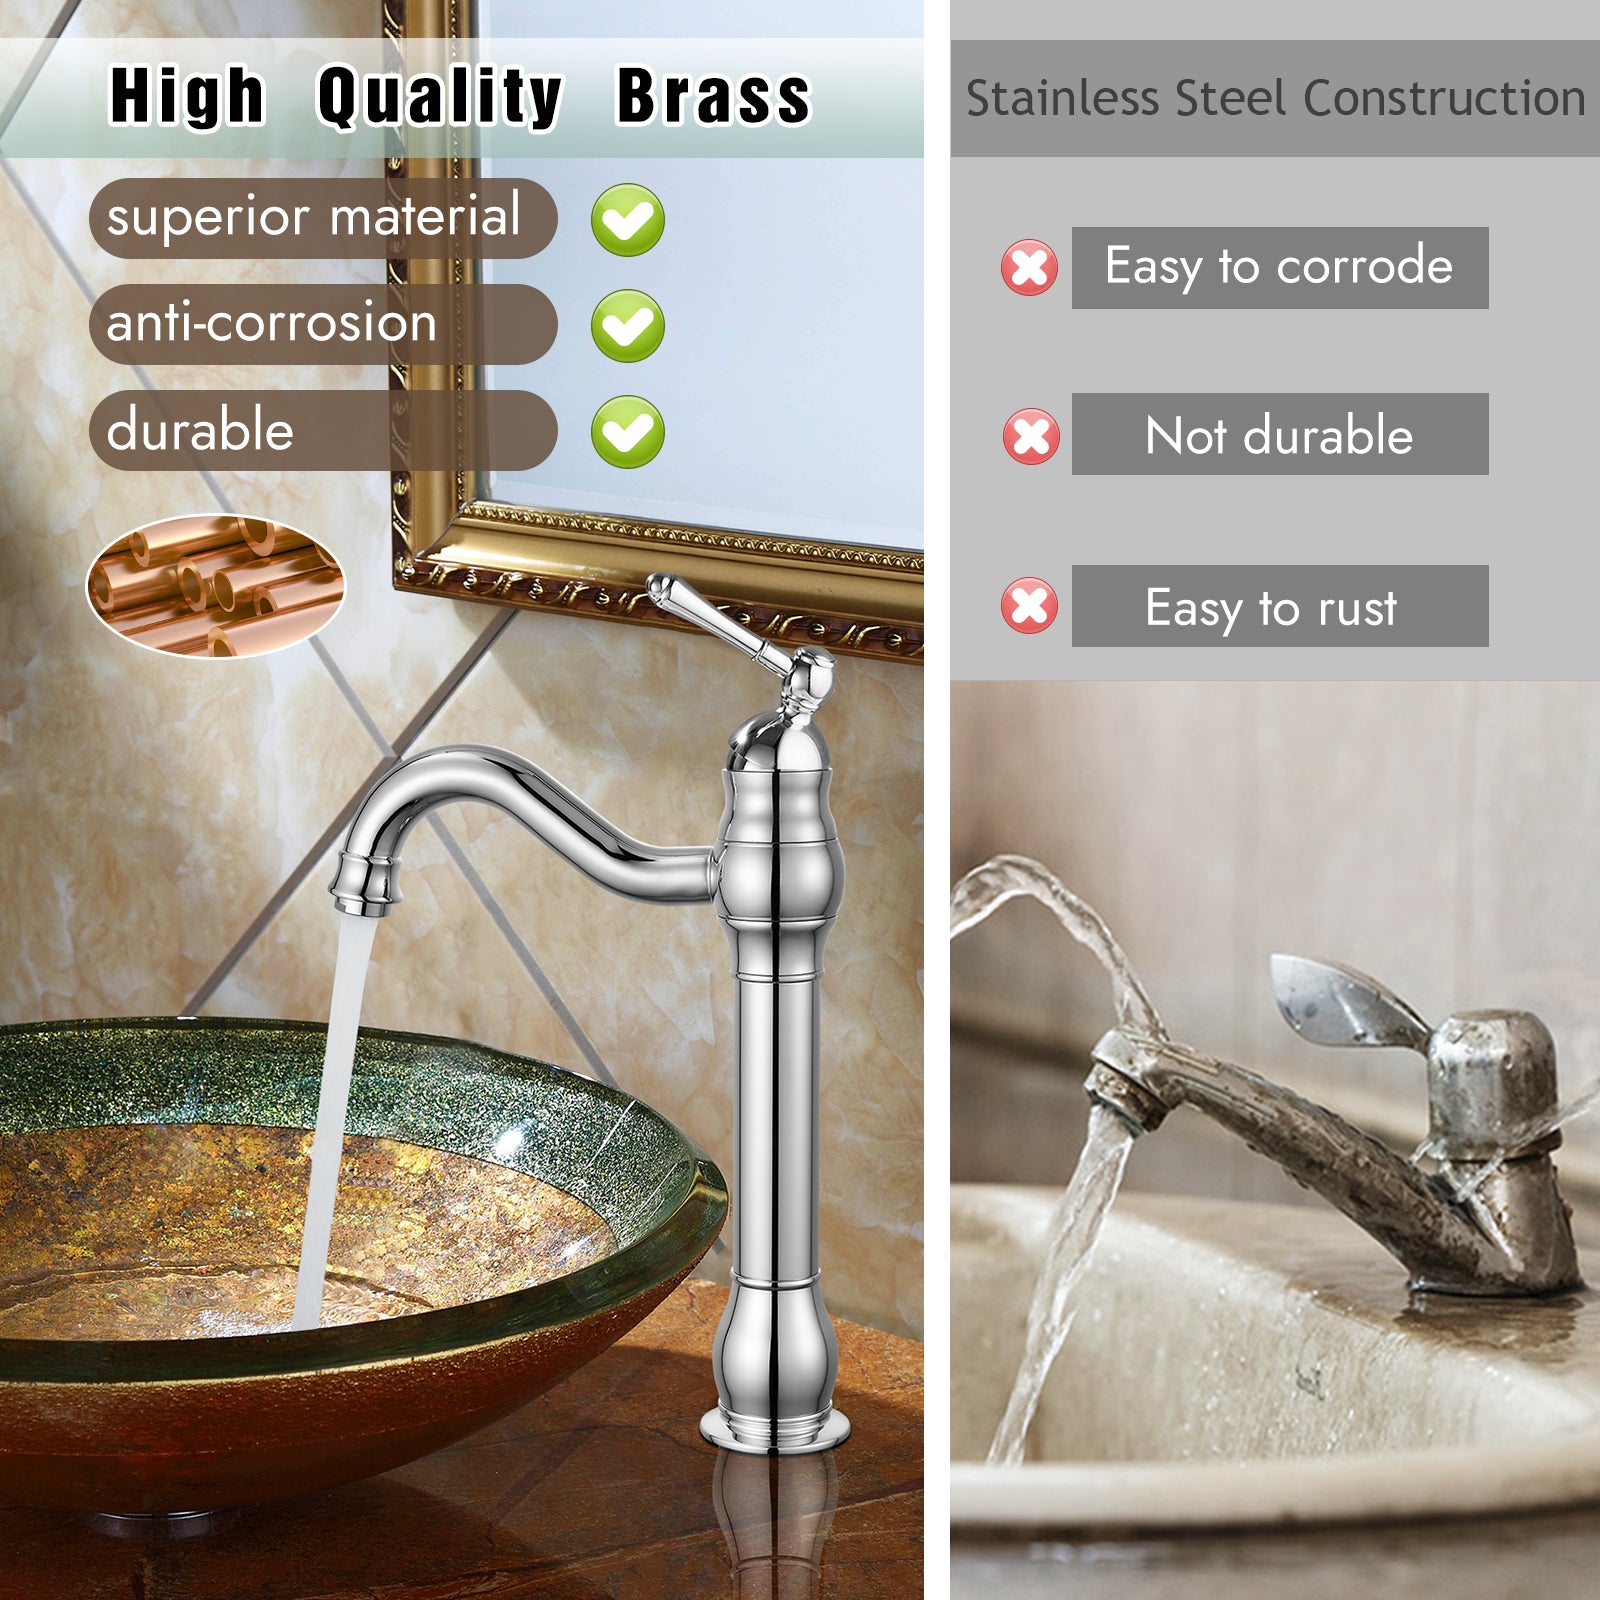 Heyalan Bathroom Vessel Sink Faucet Washingroom Single Handle One Hole High Spout Pop Up Drain Bowl Sink Brass Material 360 Degree Adjustable Lavatory Vanity Mixer Bar Tap Without Overflow